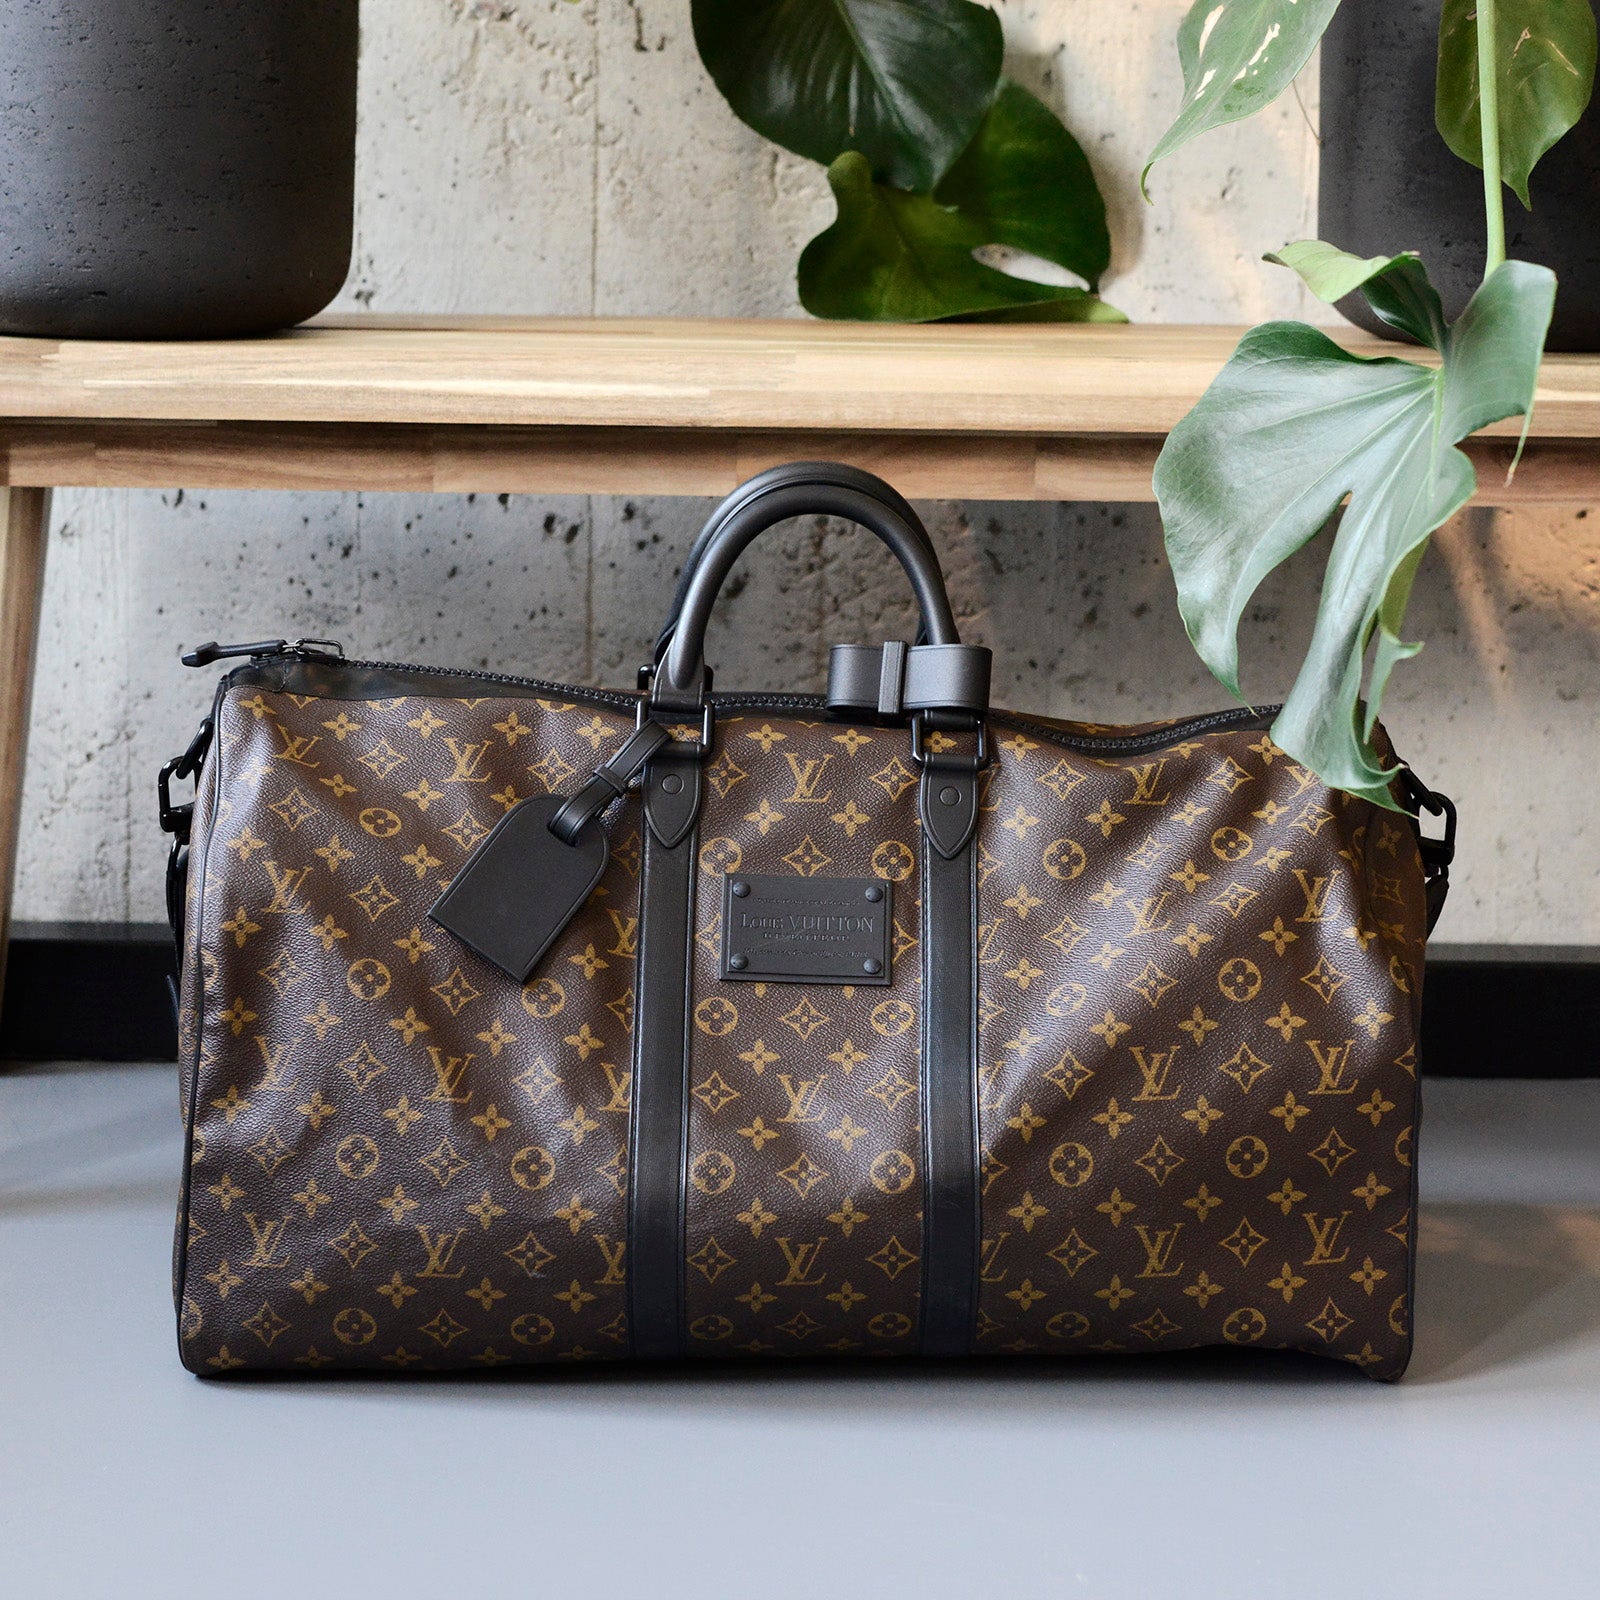 Louis Vuitton en LinkedIn: The Keepall, an iconic shape. As one of Louis  Vuitton's most recognizable…